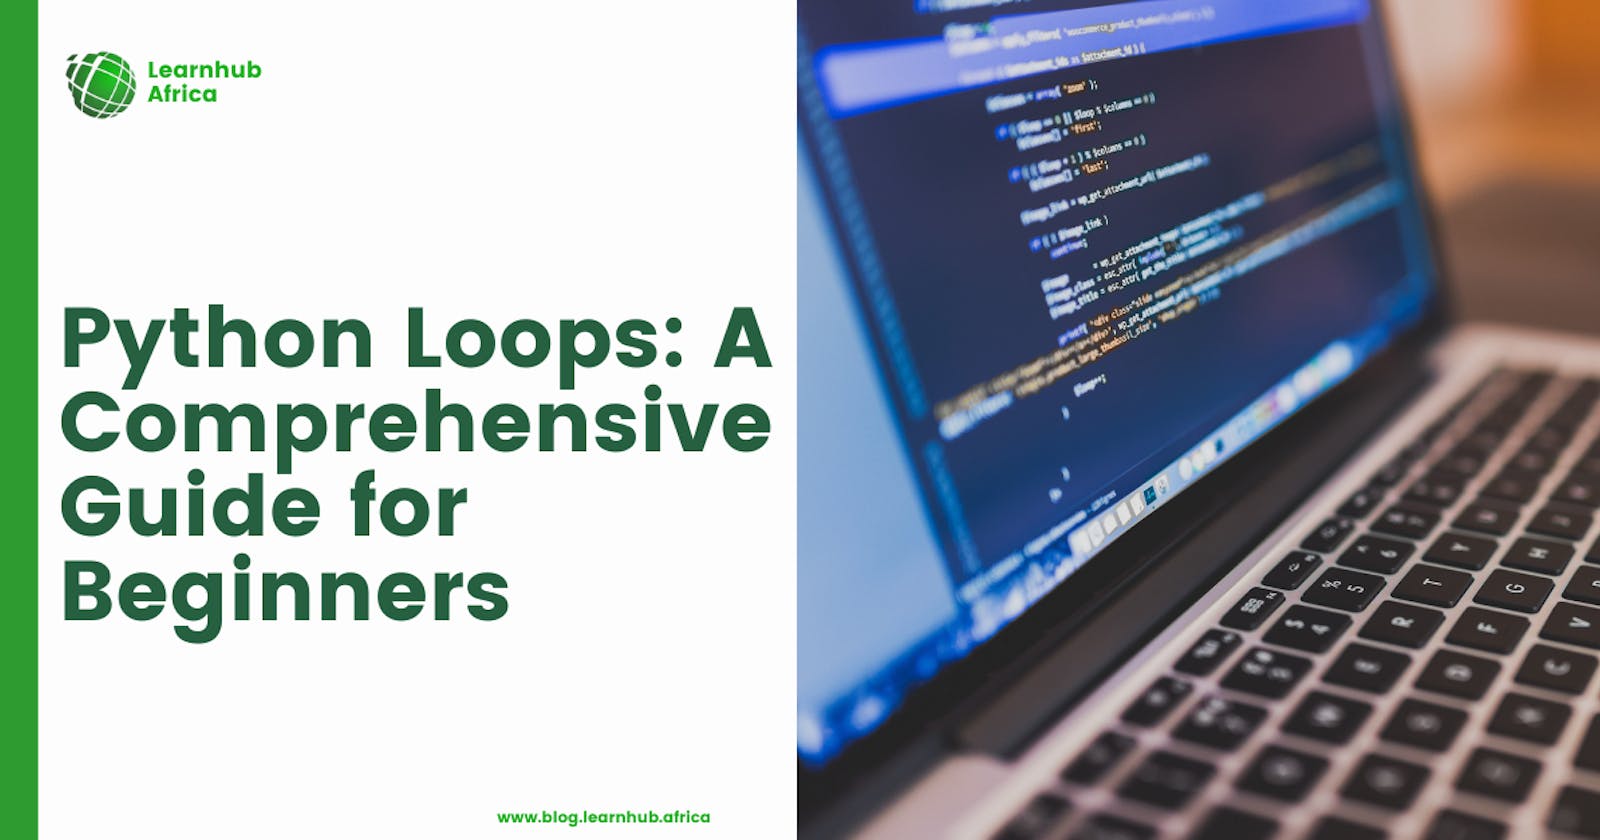 Python Loops: A Comprehensive Guide for Beginners